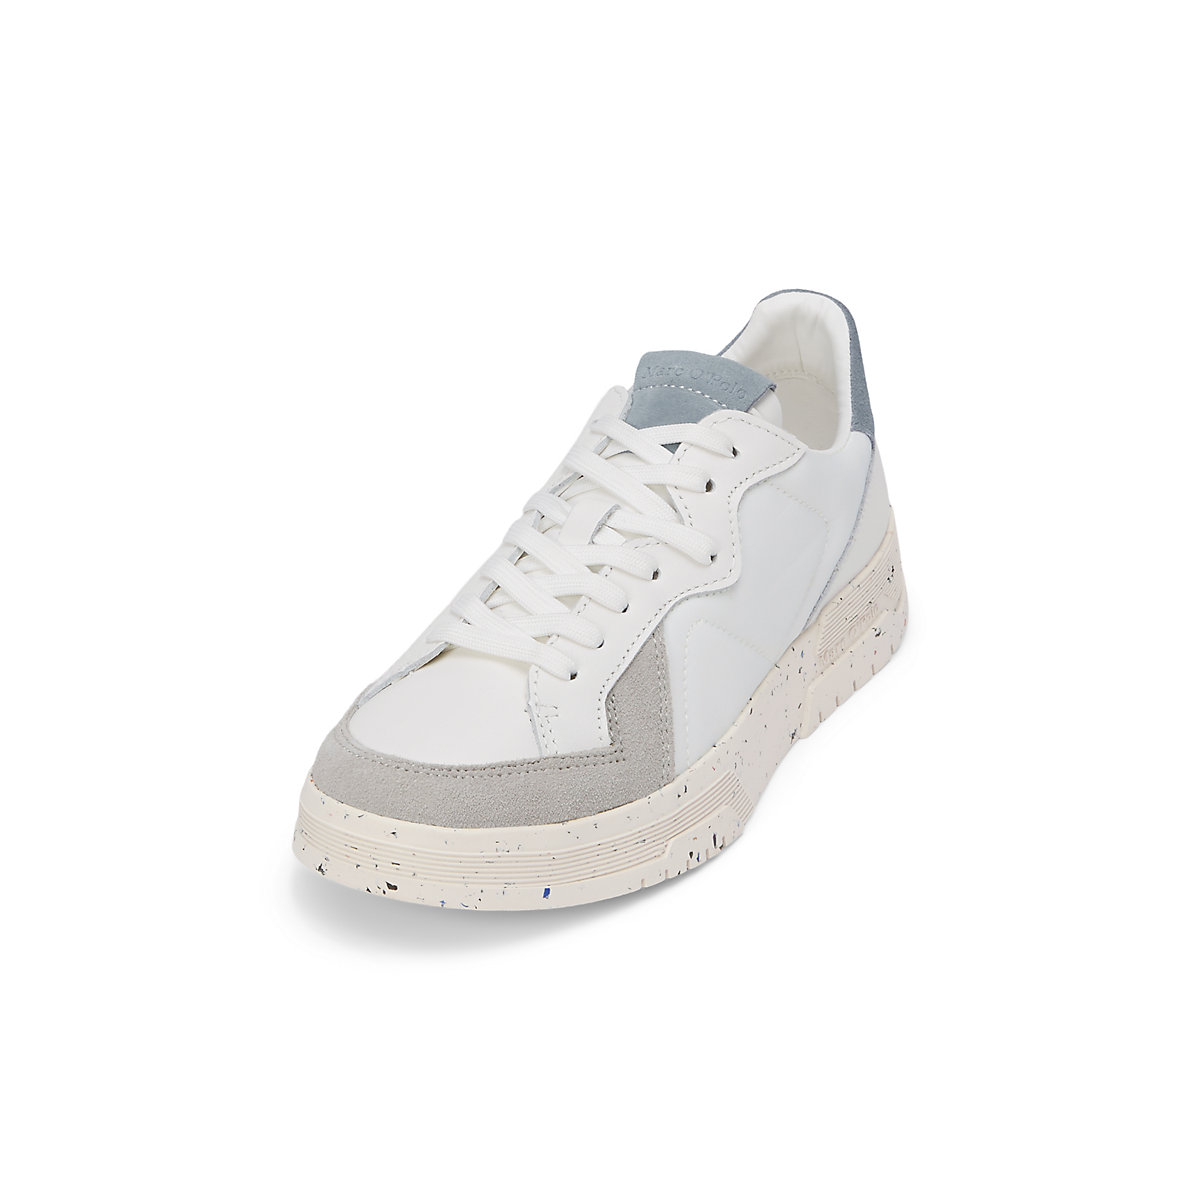 Marc O'Polo Sneaker mit Sohle aus recyceltem Material Sneakers Low weiß